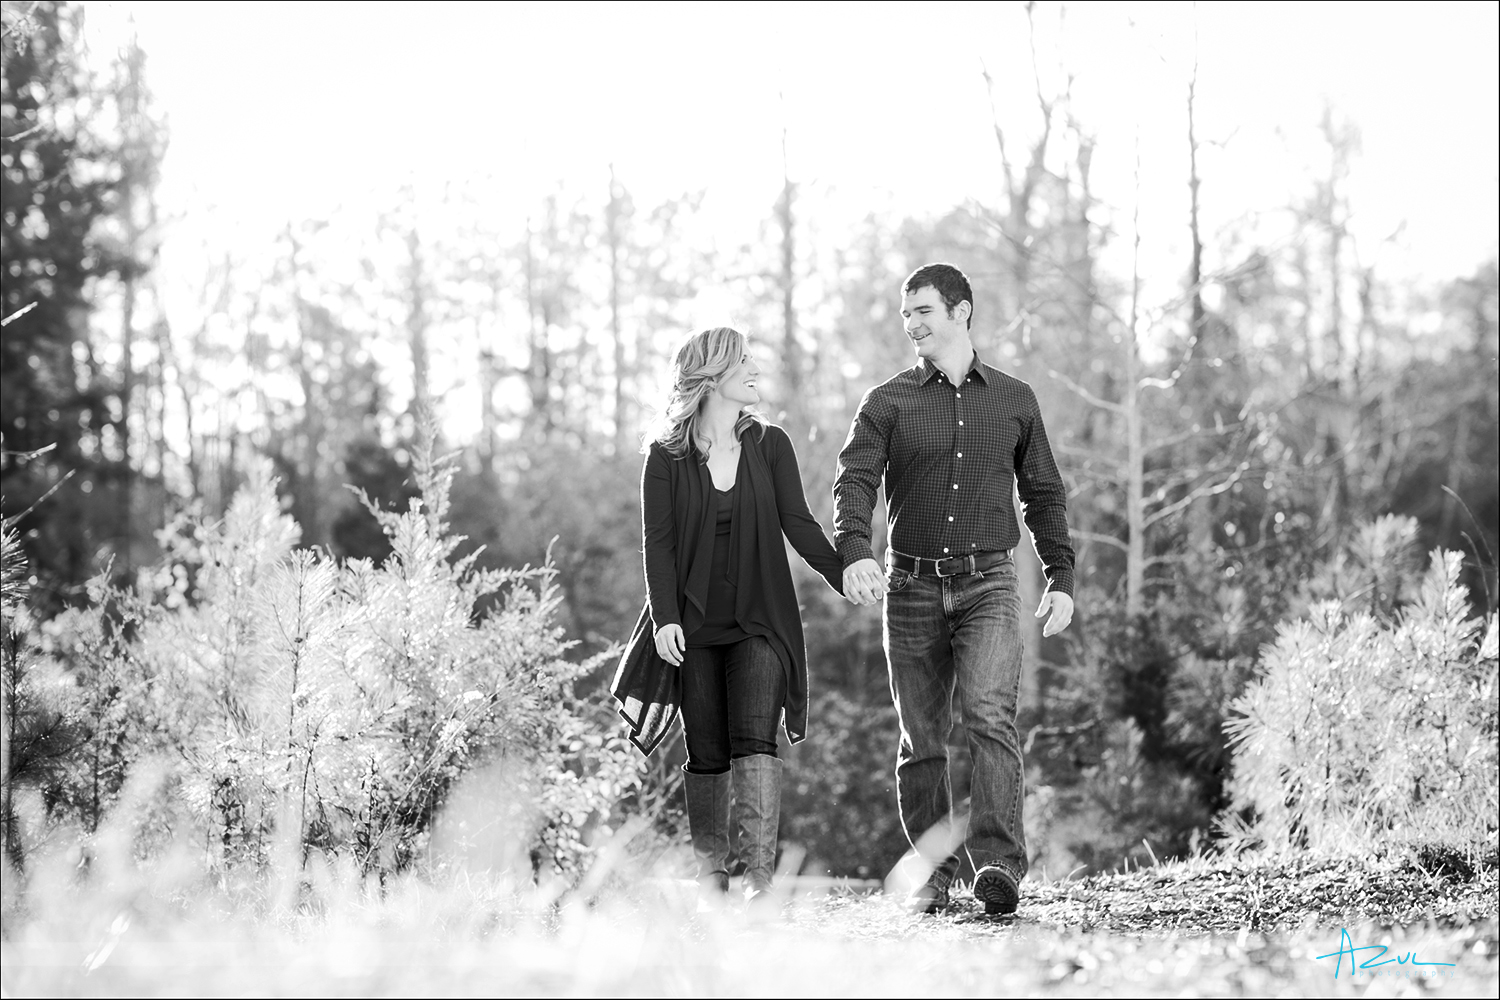 Outdoor portrait photography with couples